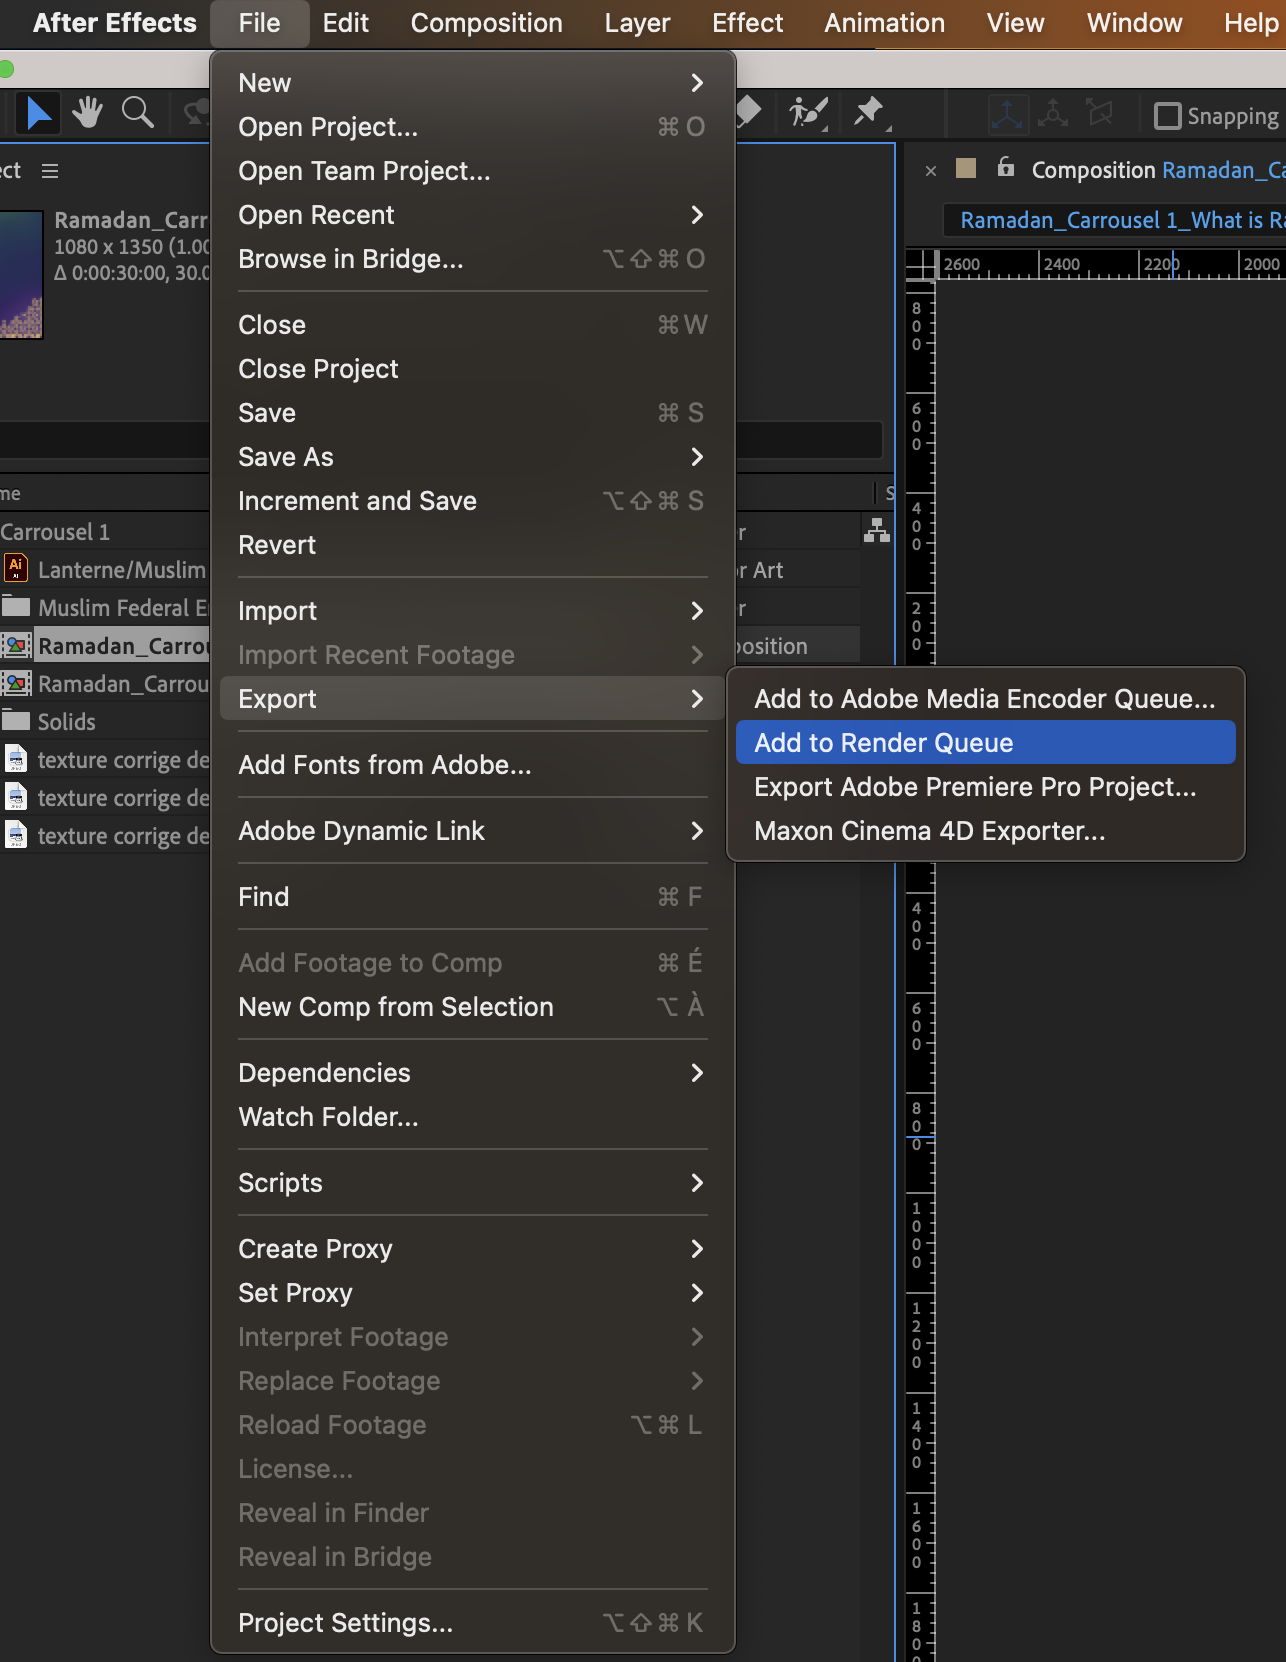 Solved: Re: Toggle Full Screen After Effects - Adobe Community